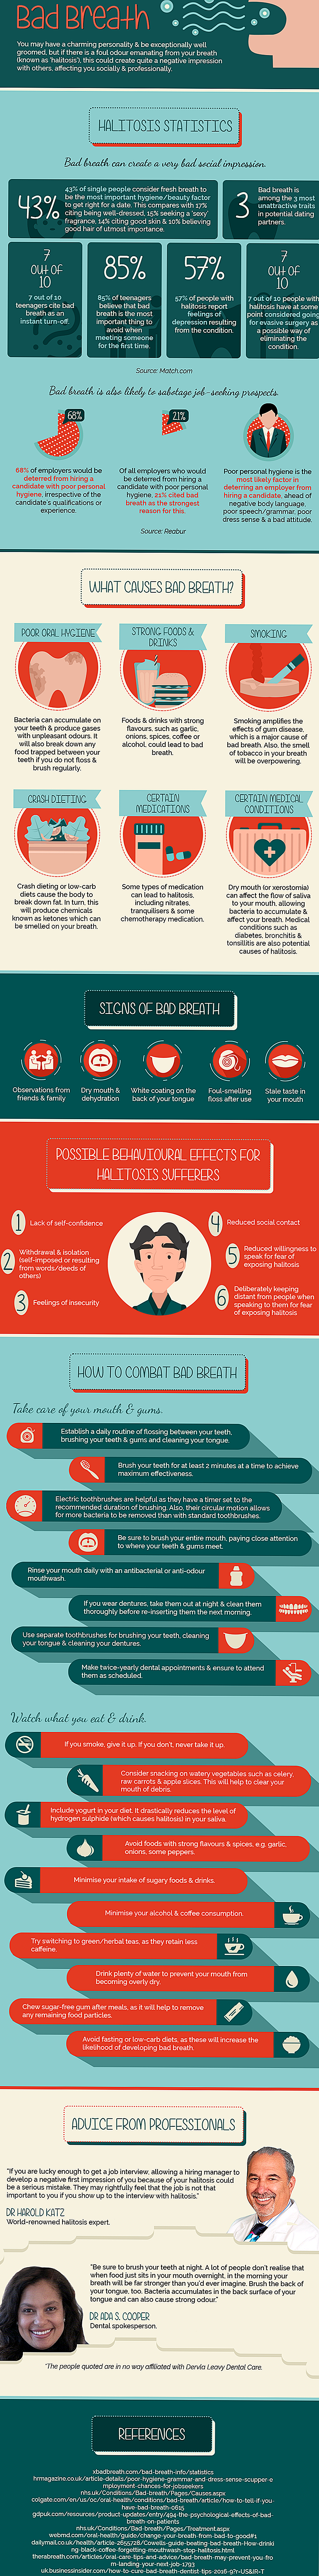 Infographic: Good Riddance to Bad Breath